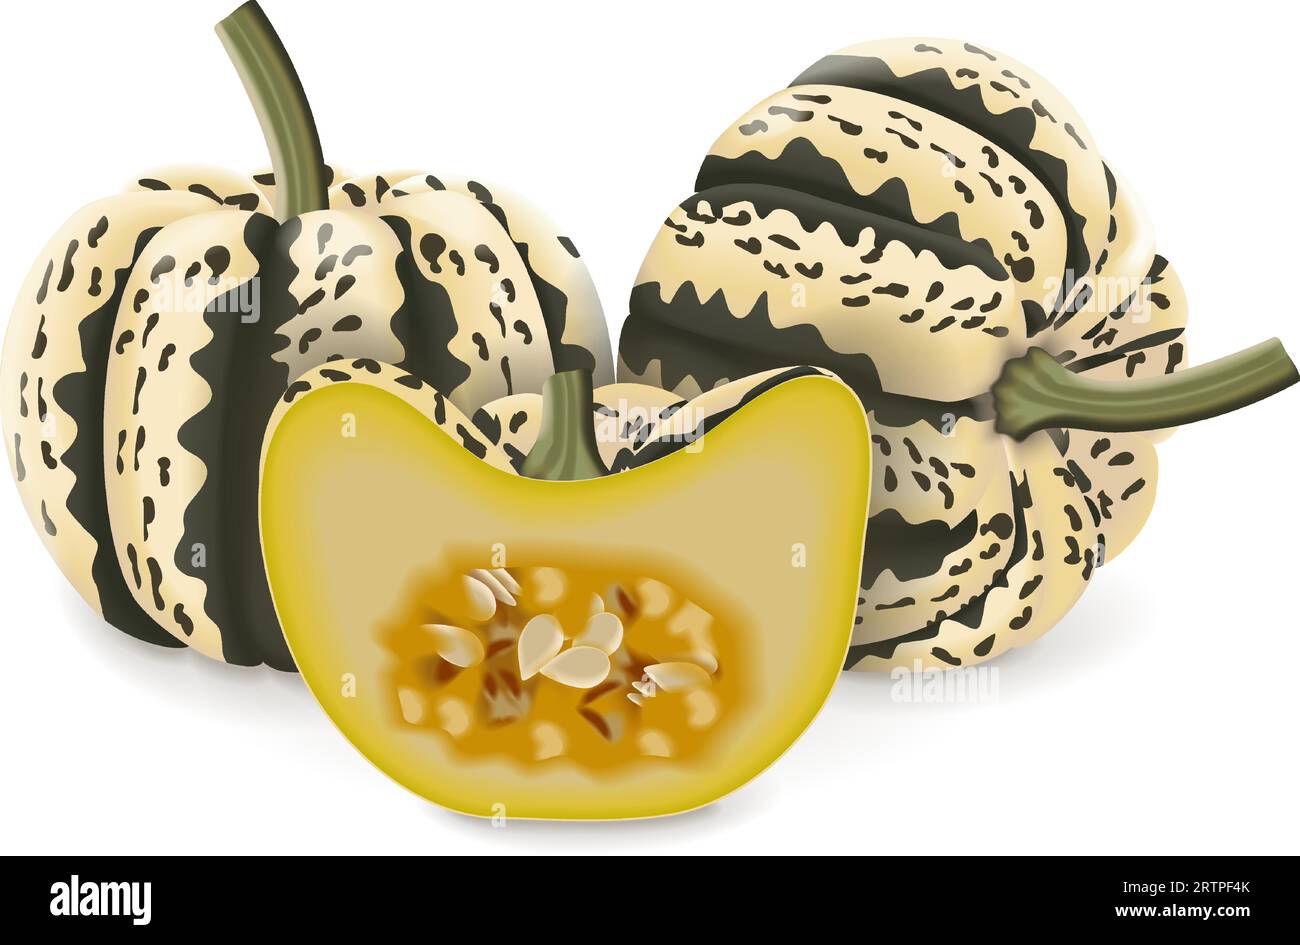 Whole and half of Sweet Dumpling squash. Winter squash. Cucurbita pepo. Fresh, organic, raw fruits and vegetables. Isolated vector illustration. Stock Vector